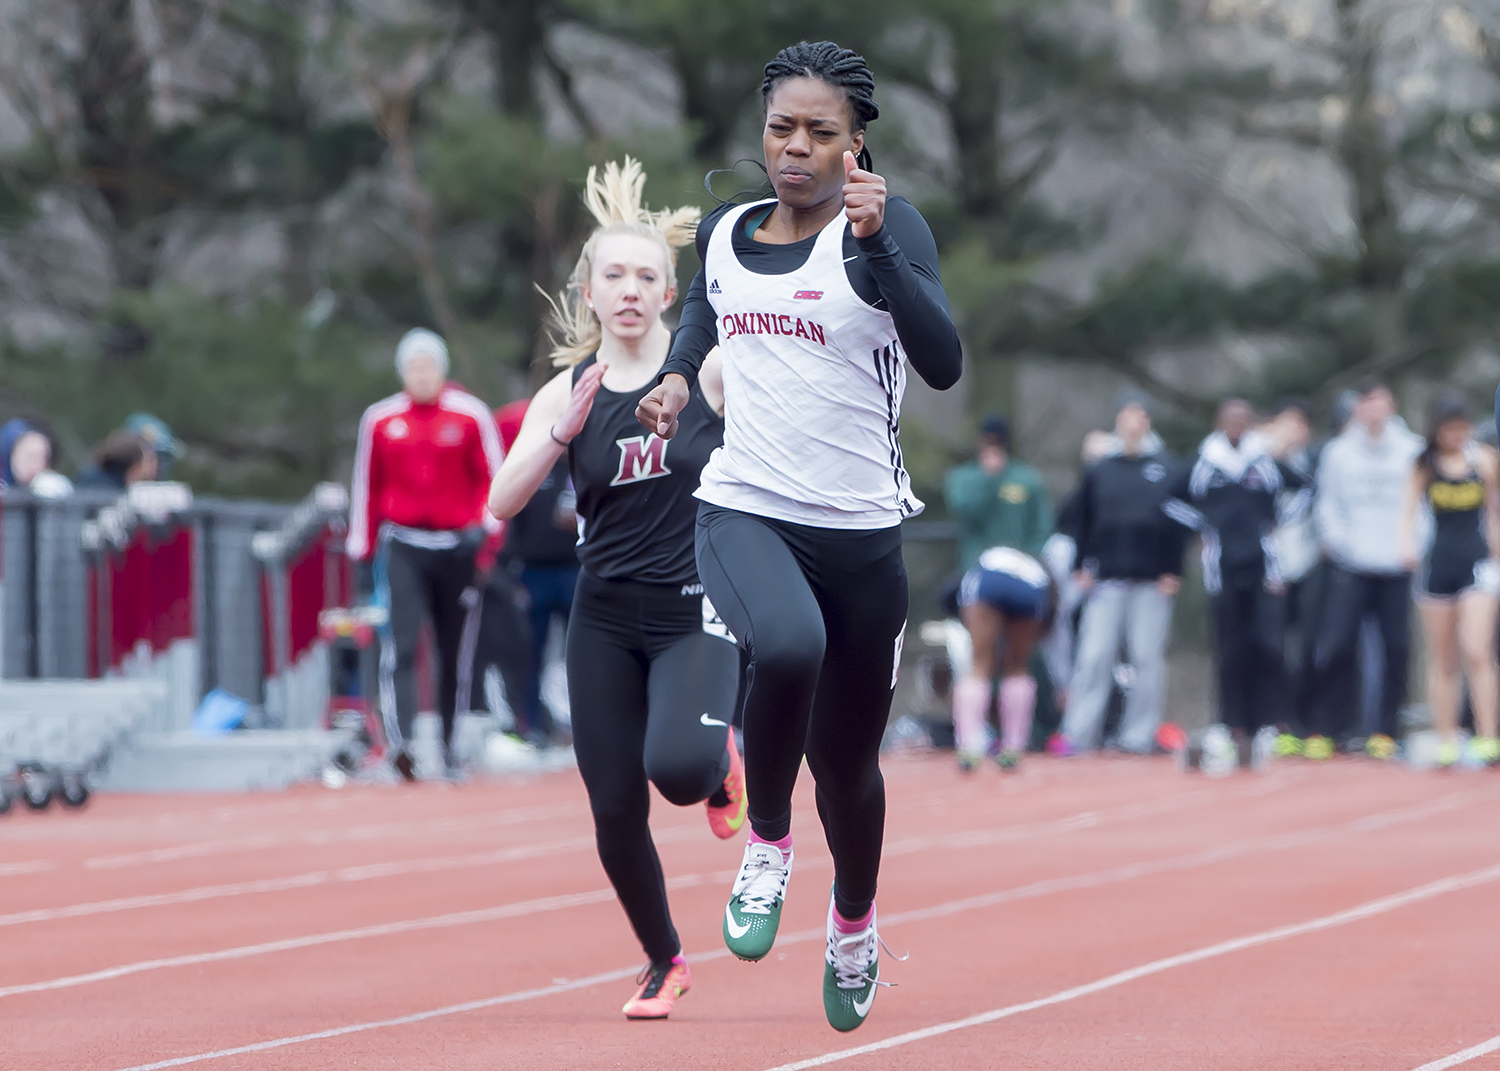 The Dominican College women's track 4x100m relay team won at the Vassar Invitational